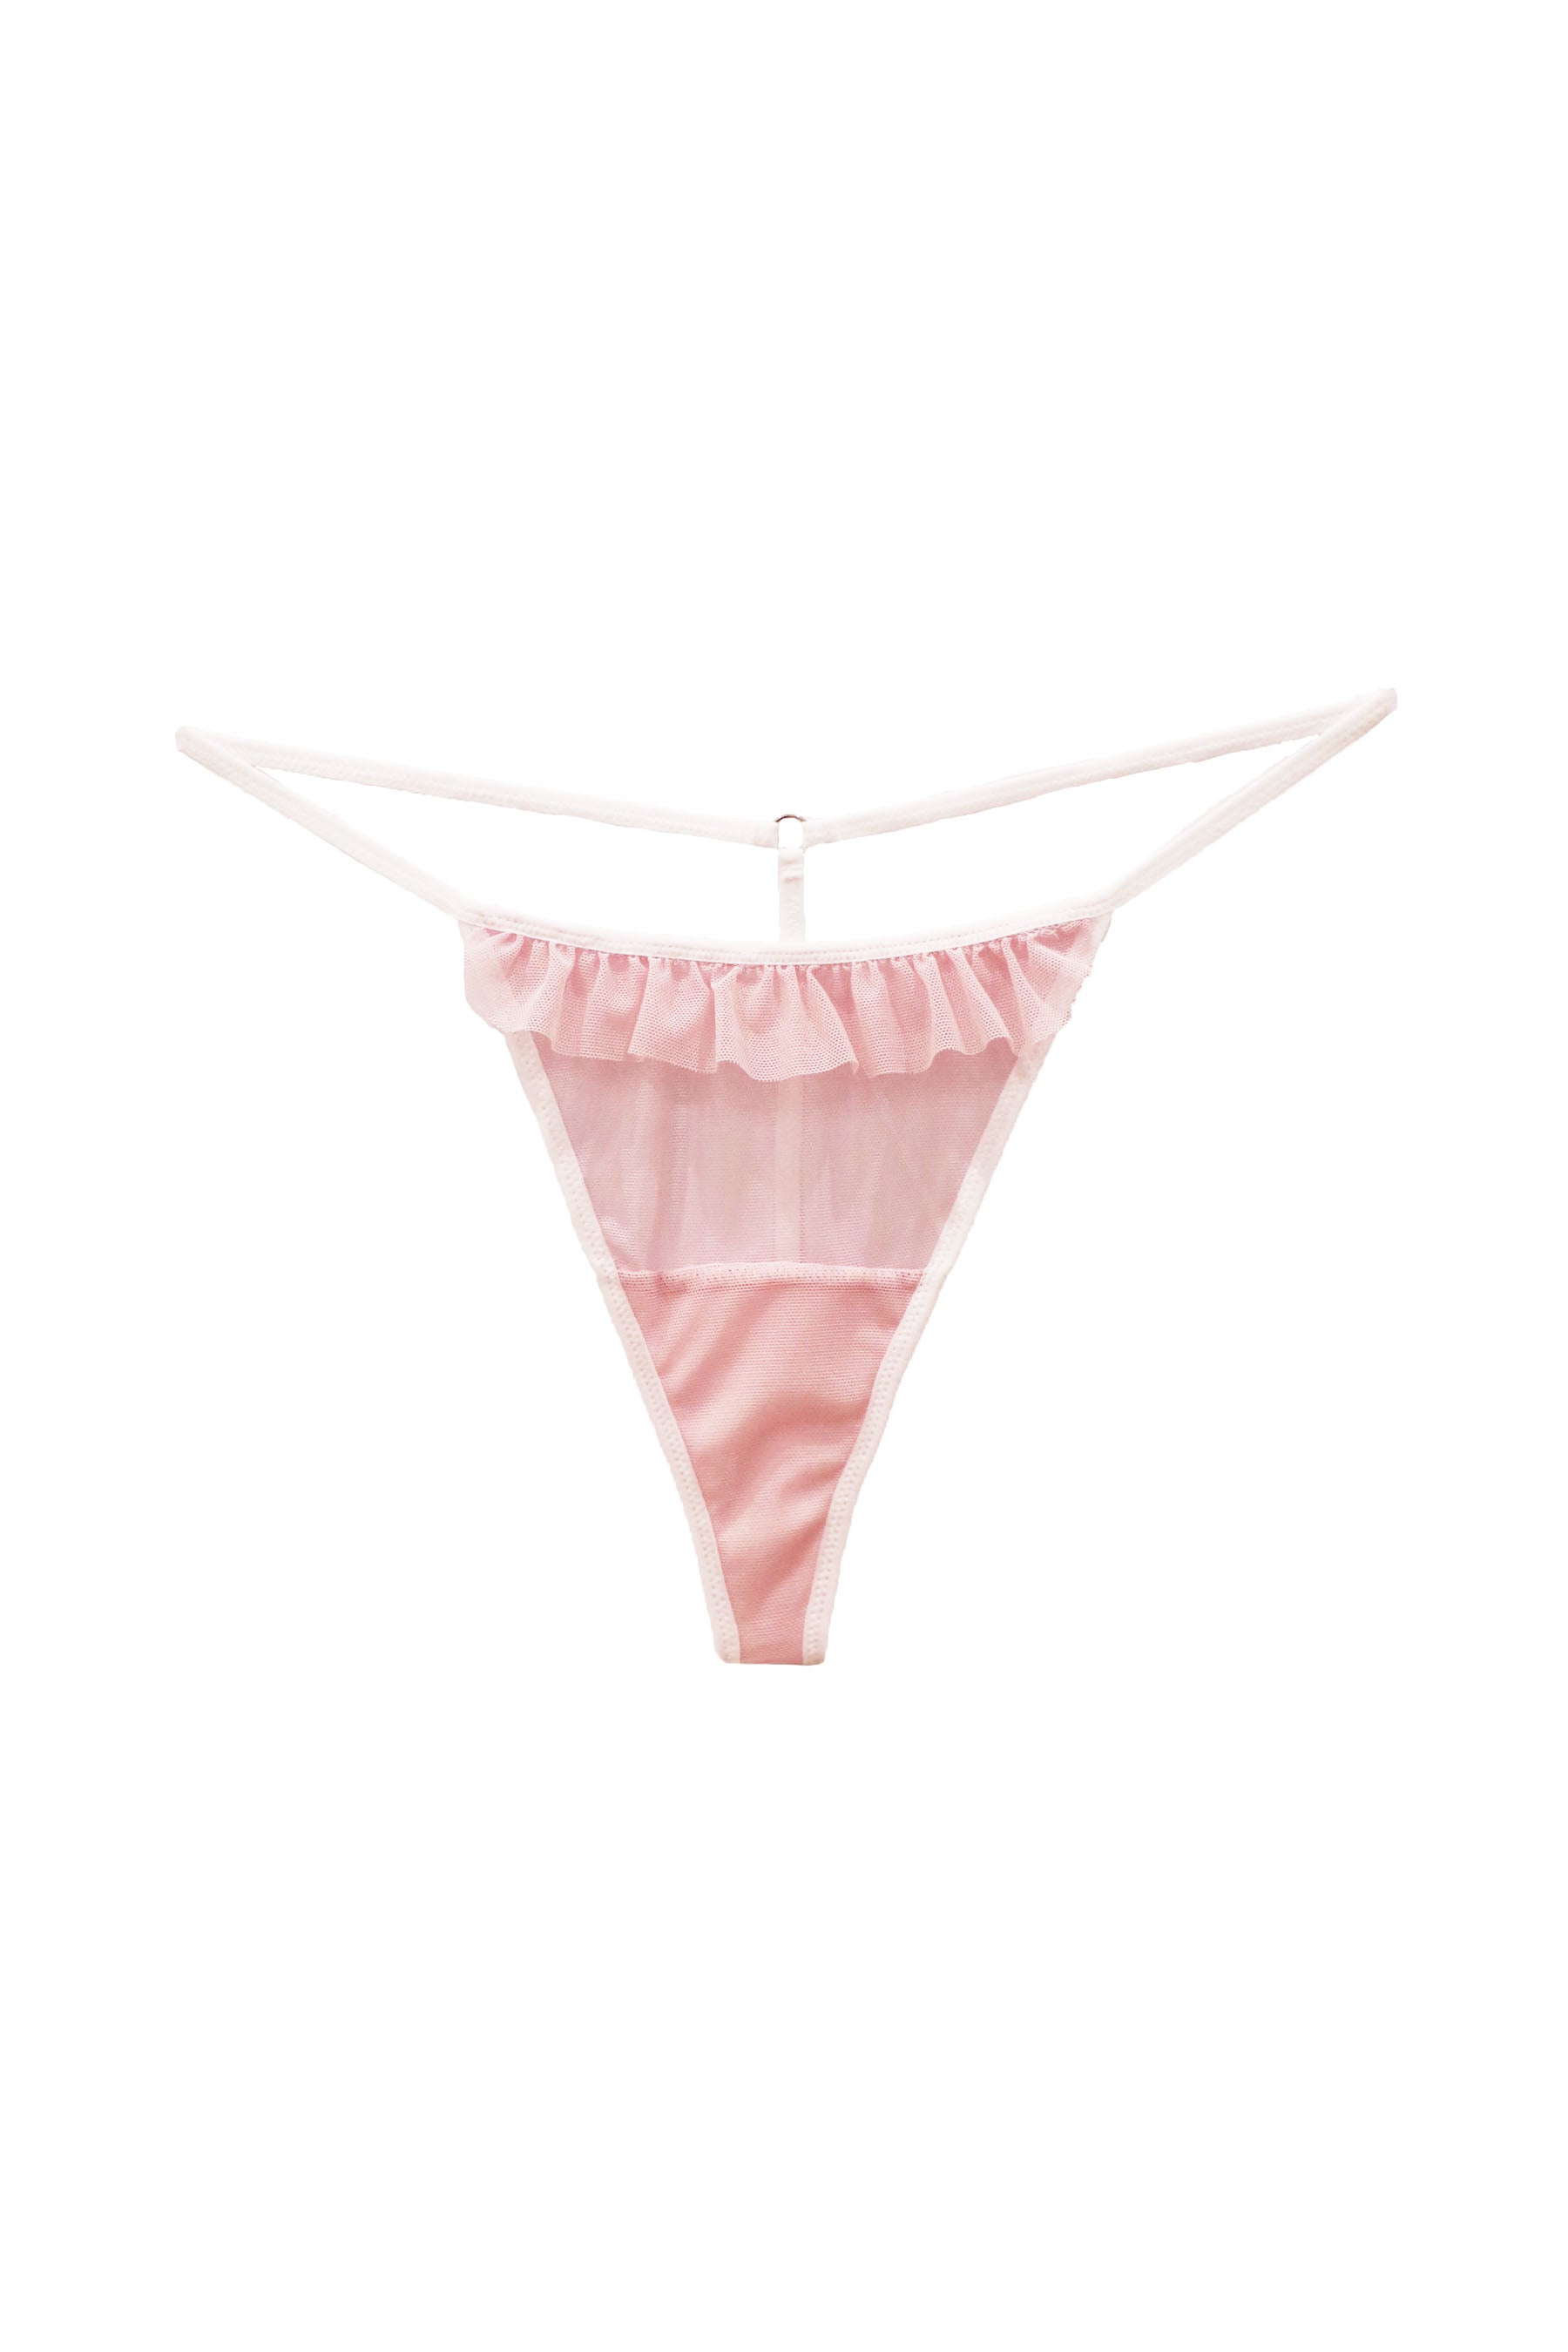 MARY YOUNG Remi G-String in Blush